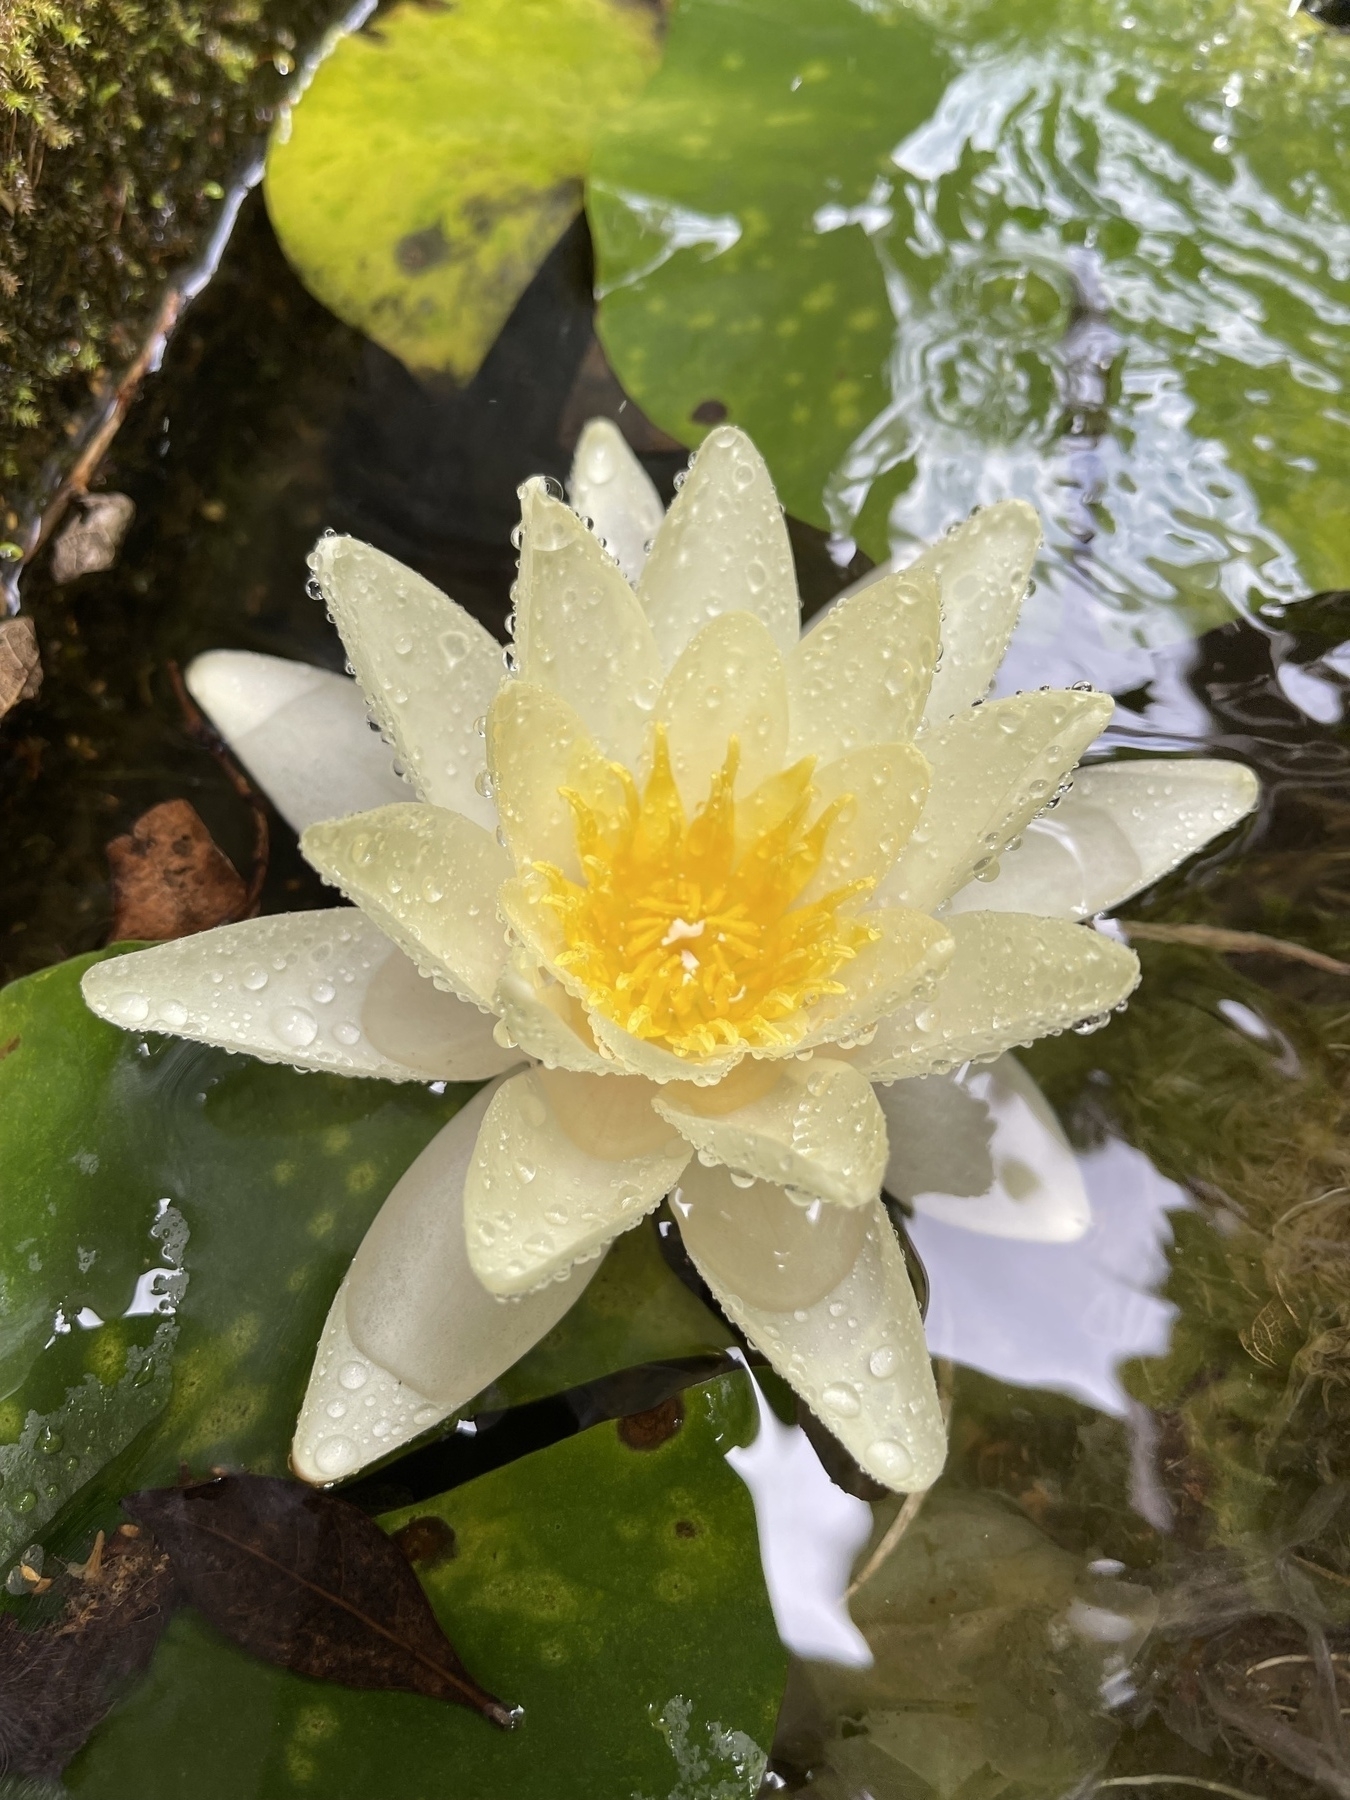 A European white water lily with white petals and a yellow stamens and is speckled with water droplets.